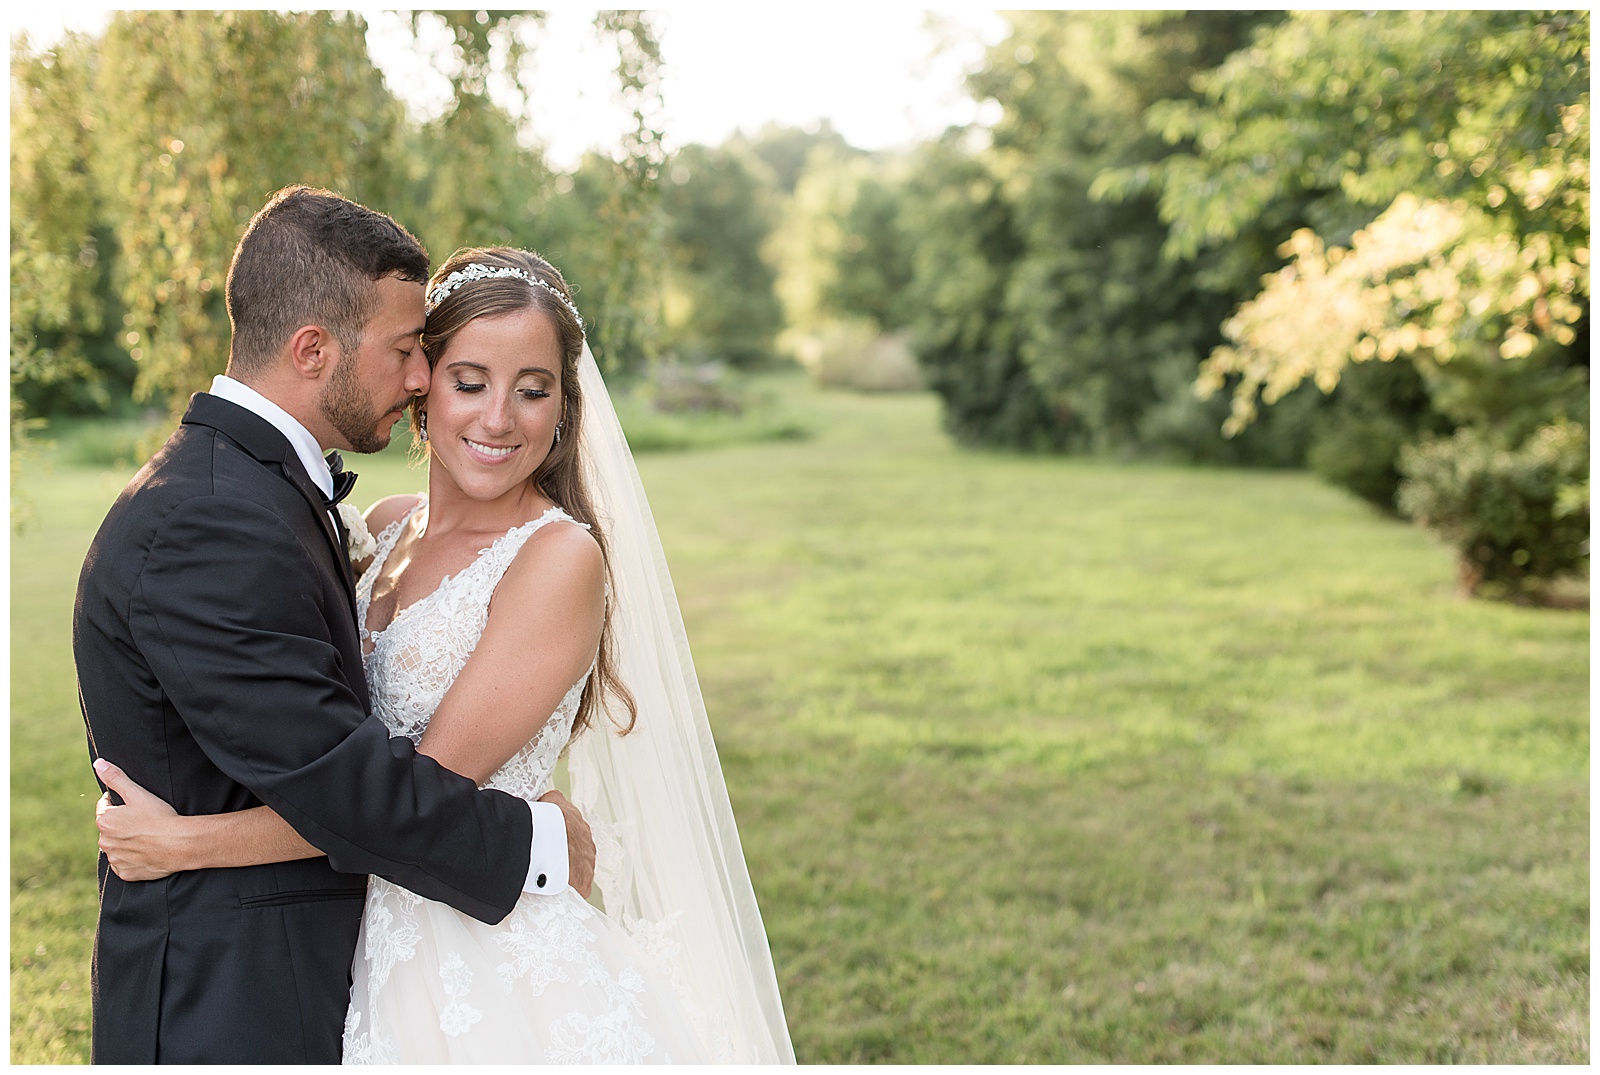 bride and groom with arms wrapped around each other and groom meaning into brides cheek with she smiles down toward her camera